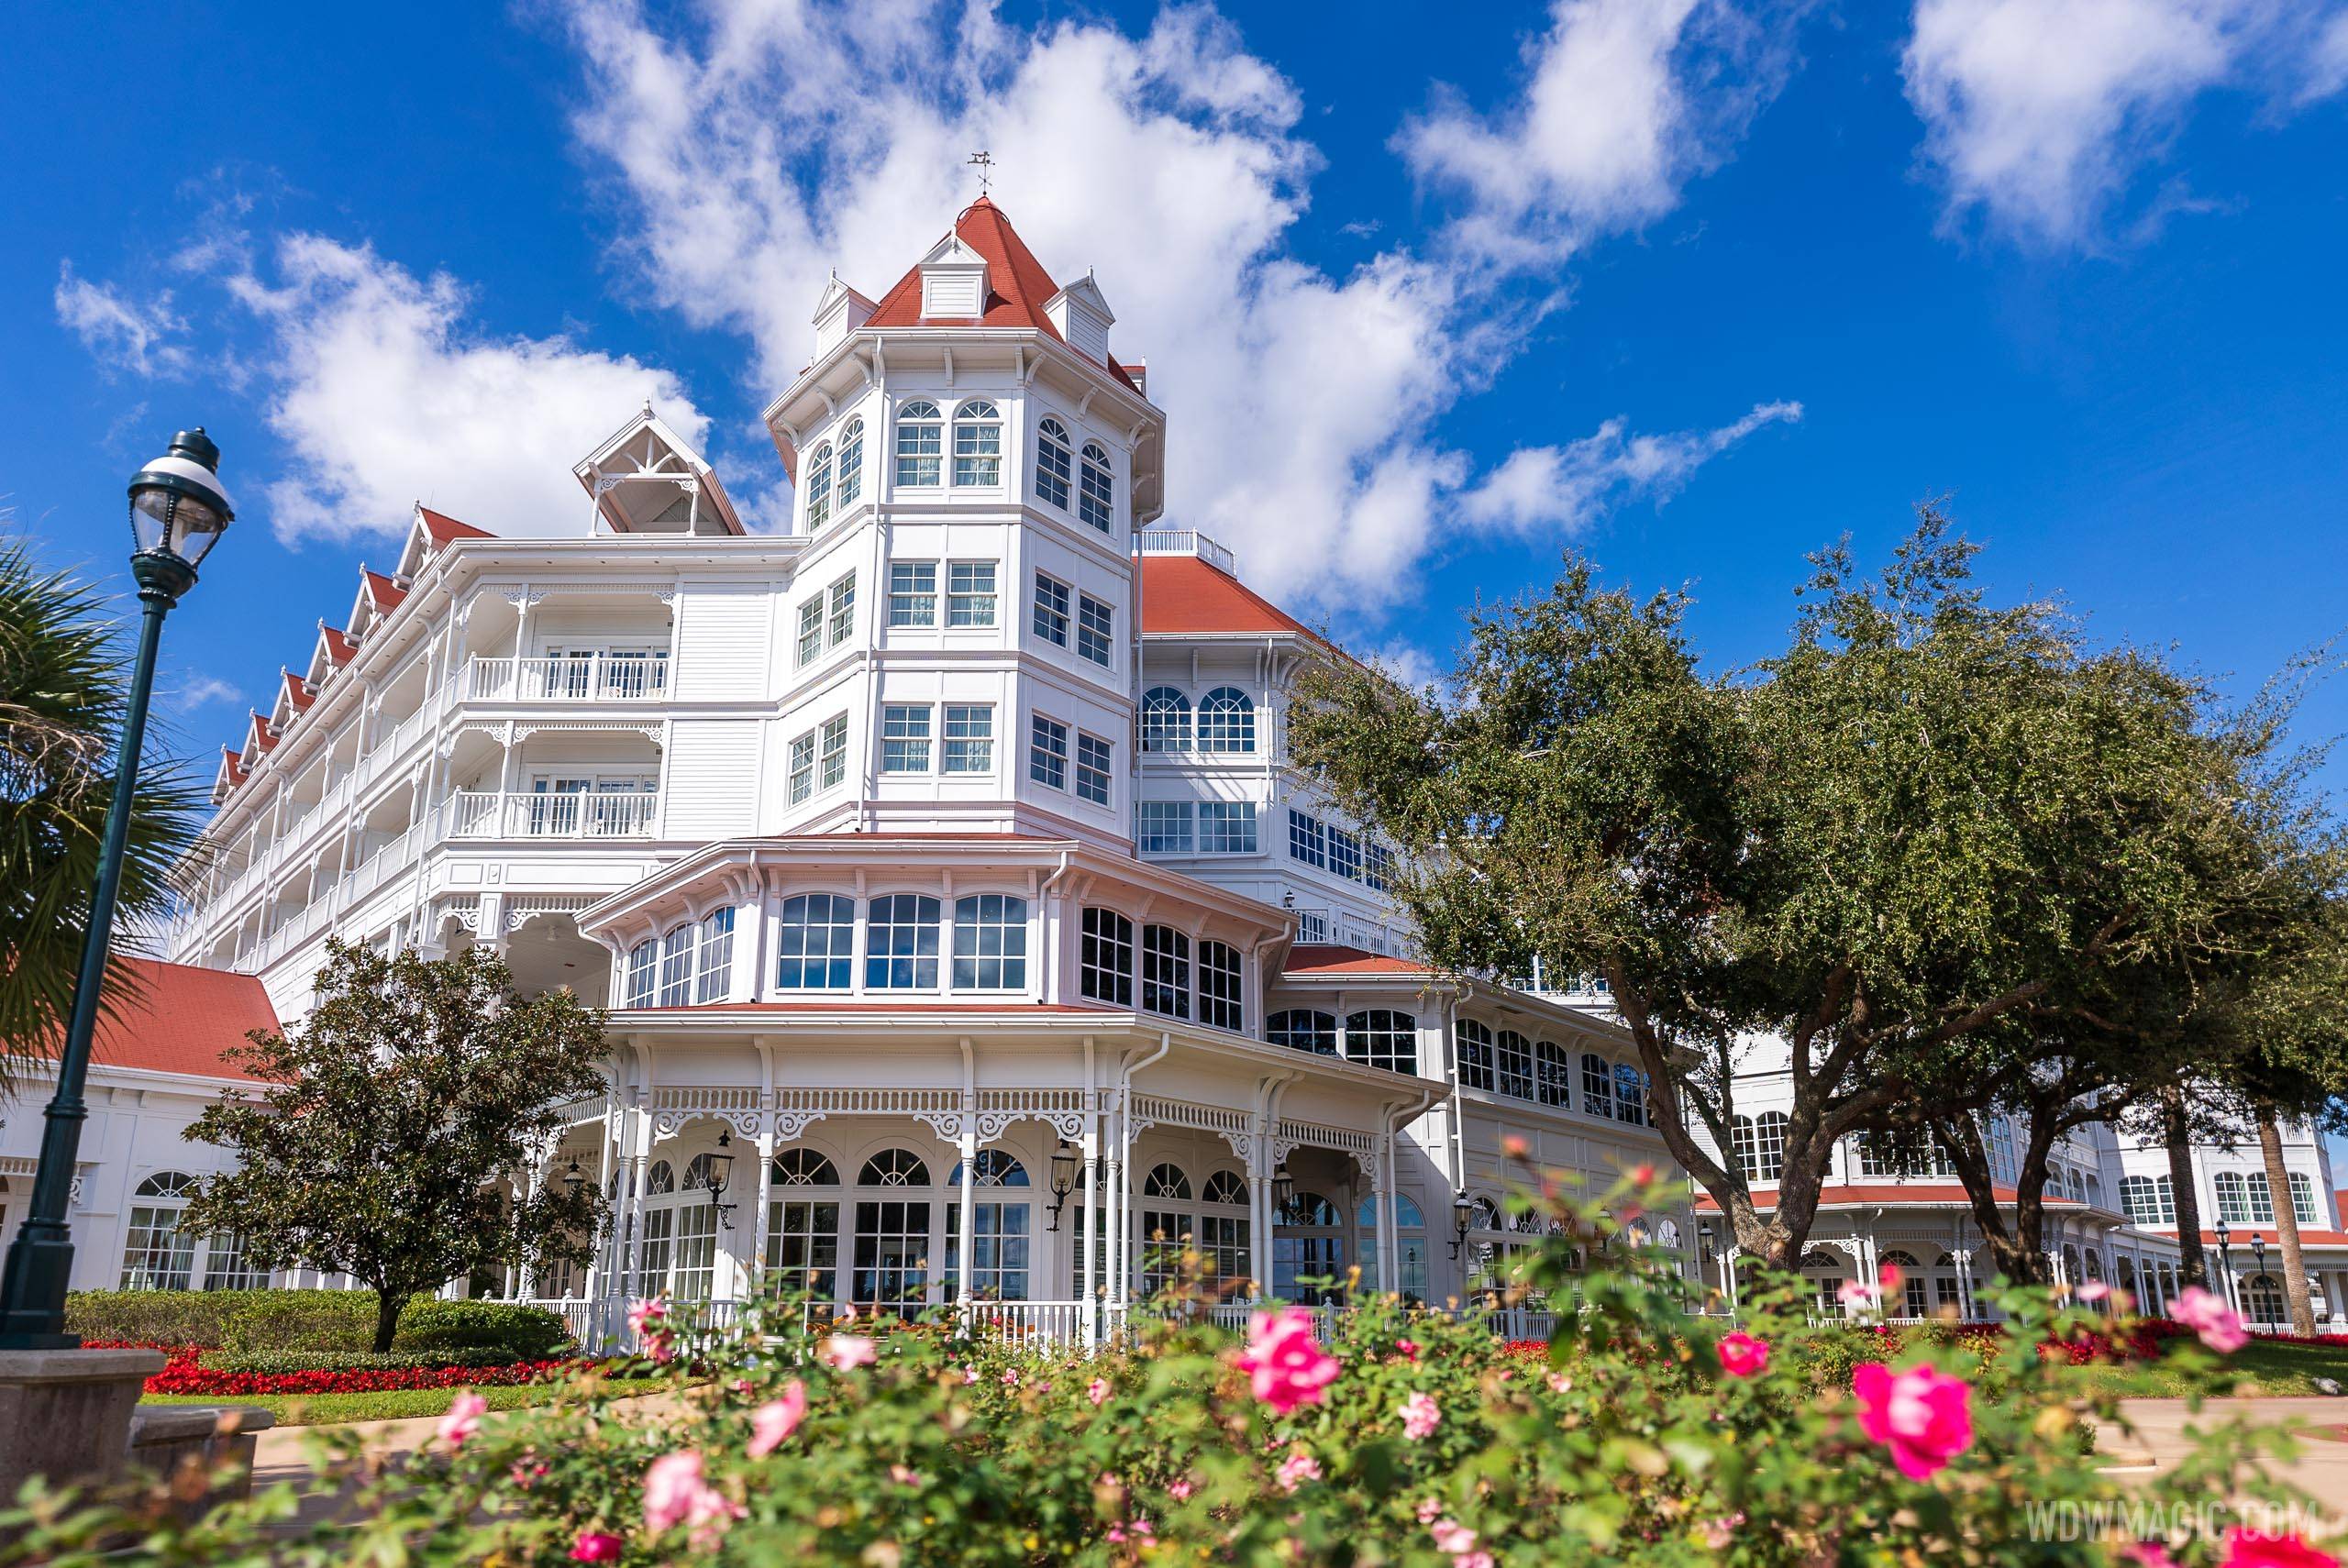 Holiday Brunch returning to 1900 Park Fare at Disney's Grand Floridian Resort